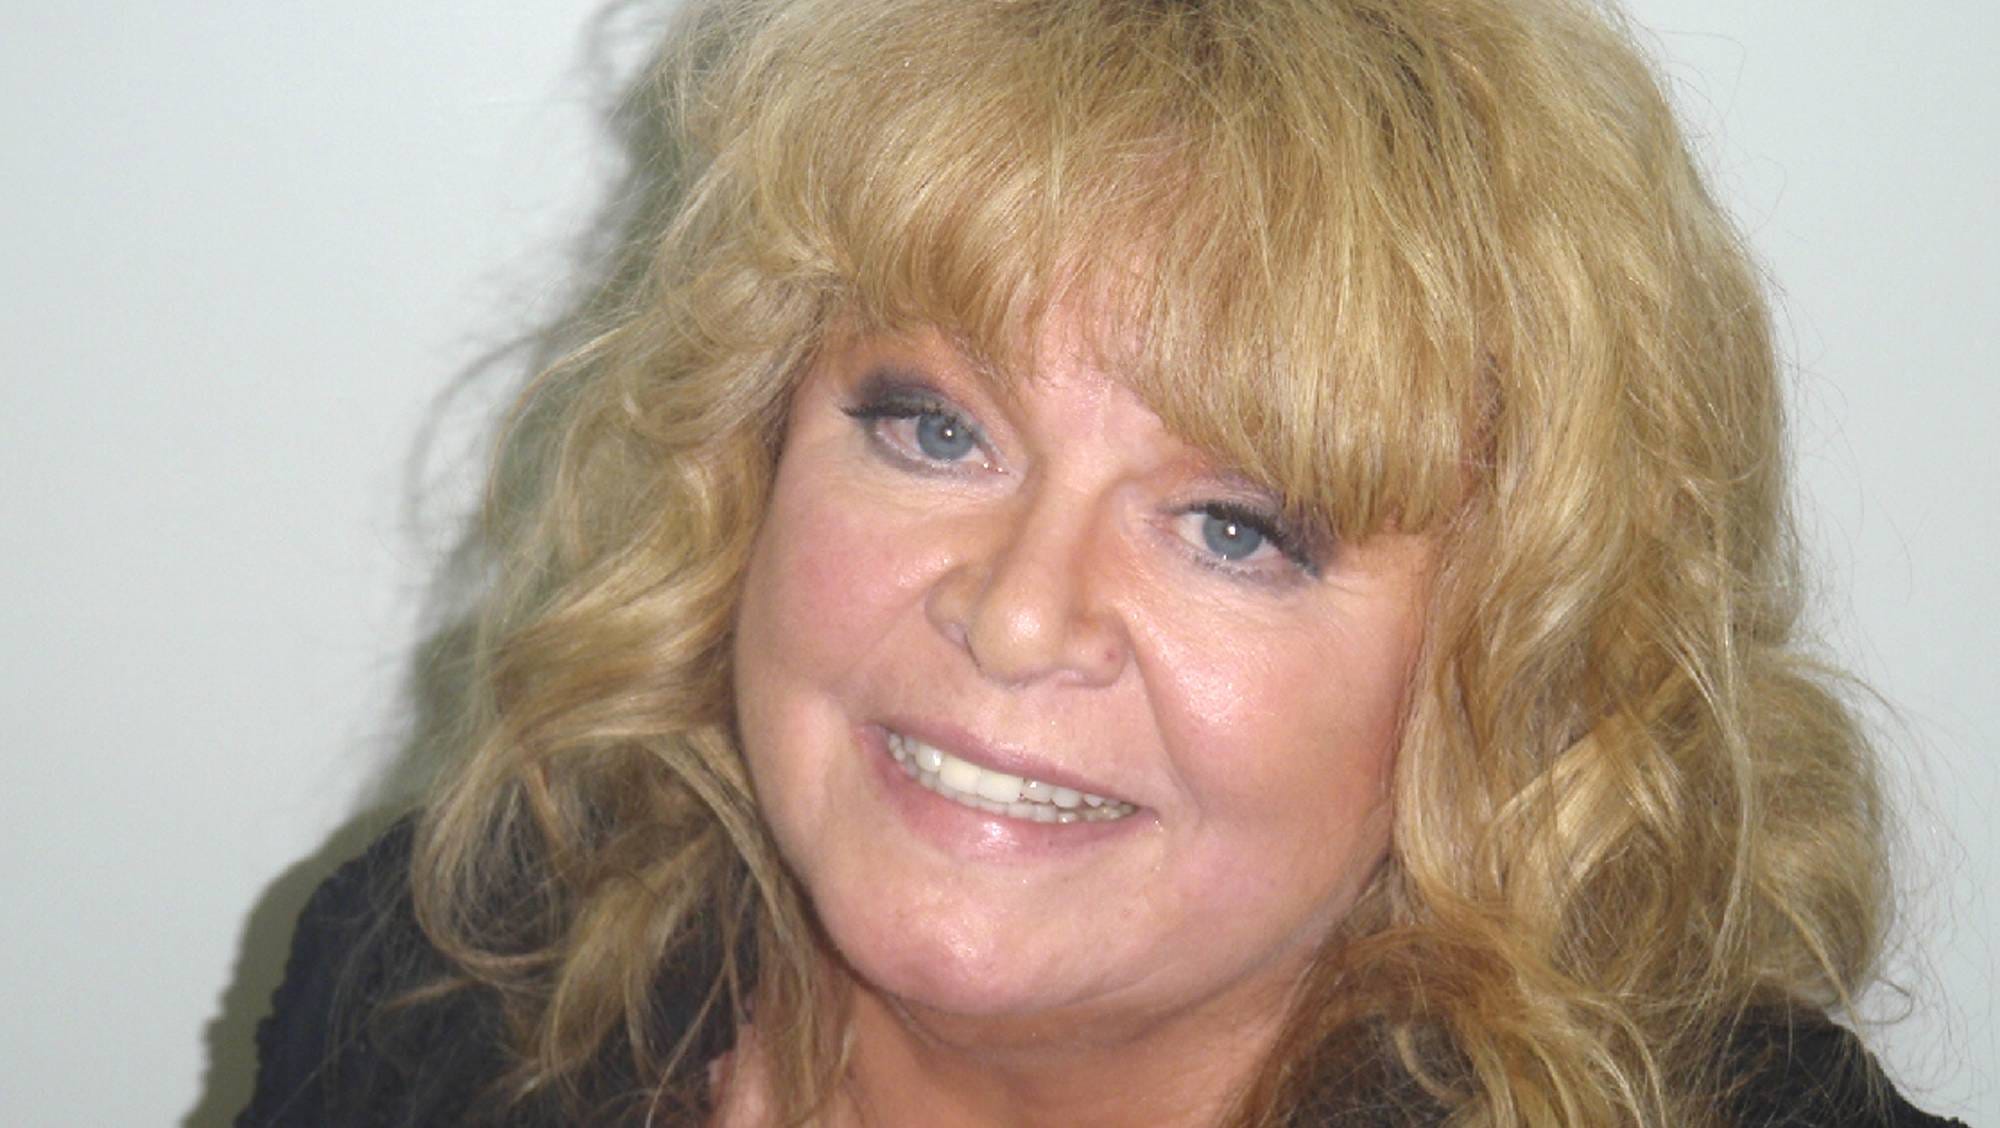 Actress Sally Struthers arrested on suspicion of DUI in Maine. 